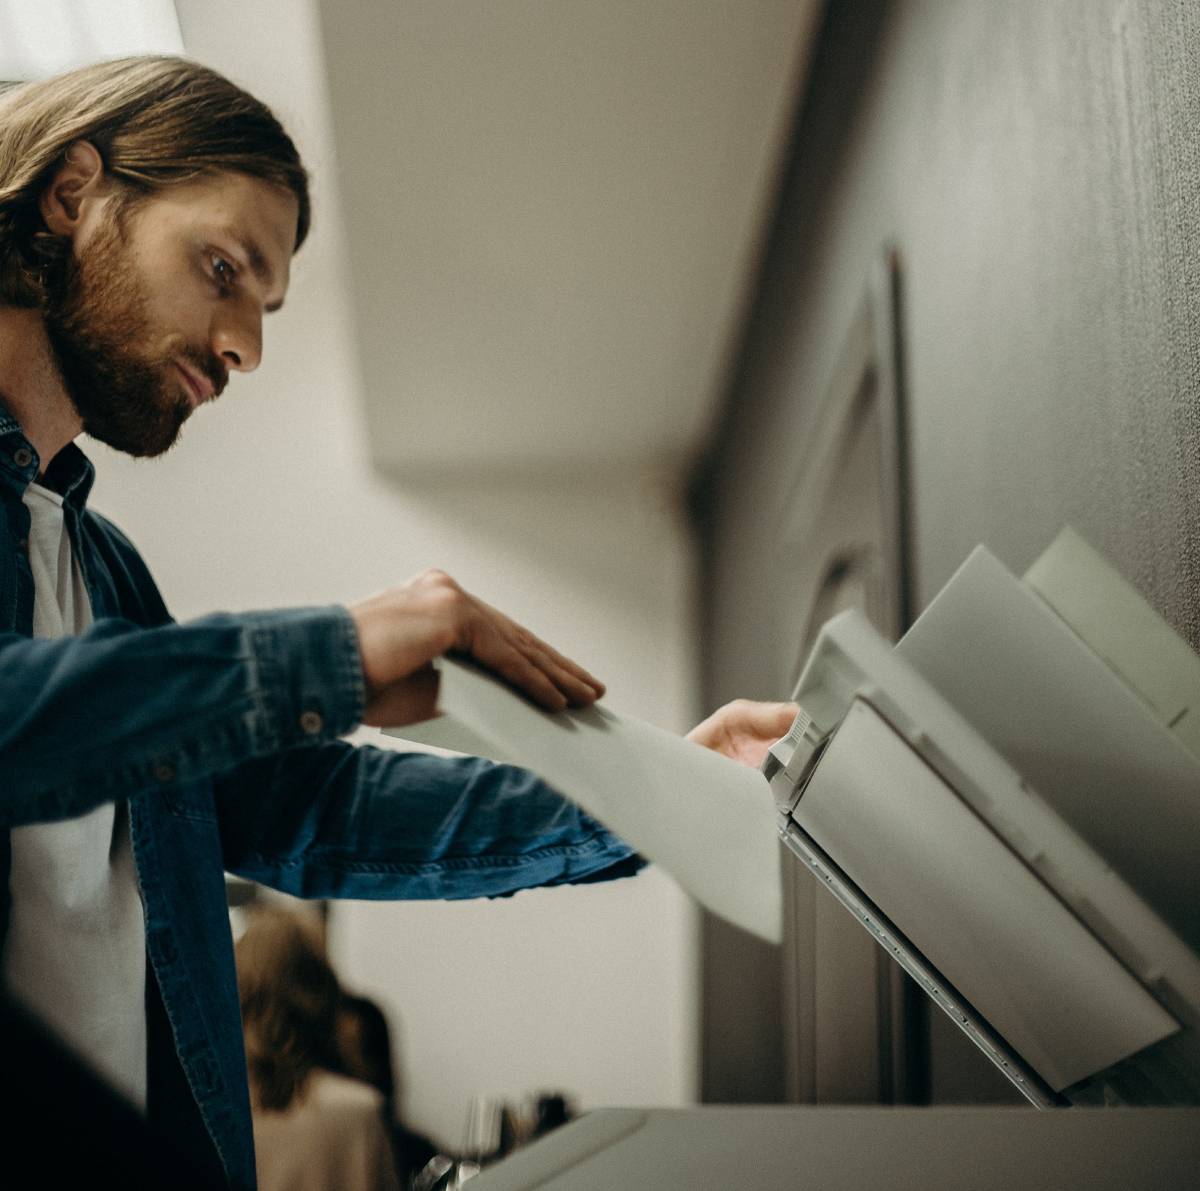 A man putting a piece of paper onto a copier while holding the lid open